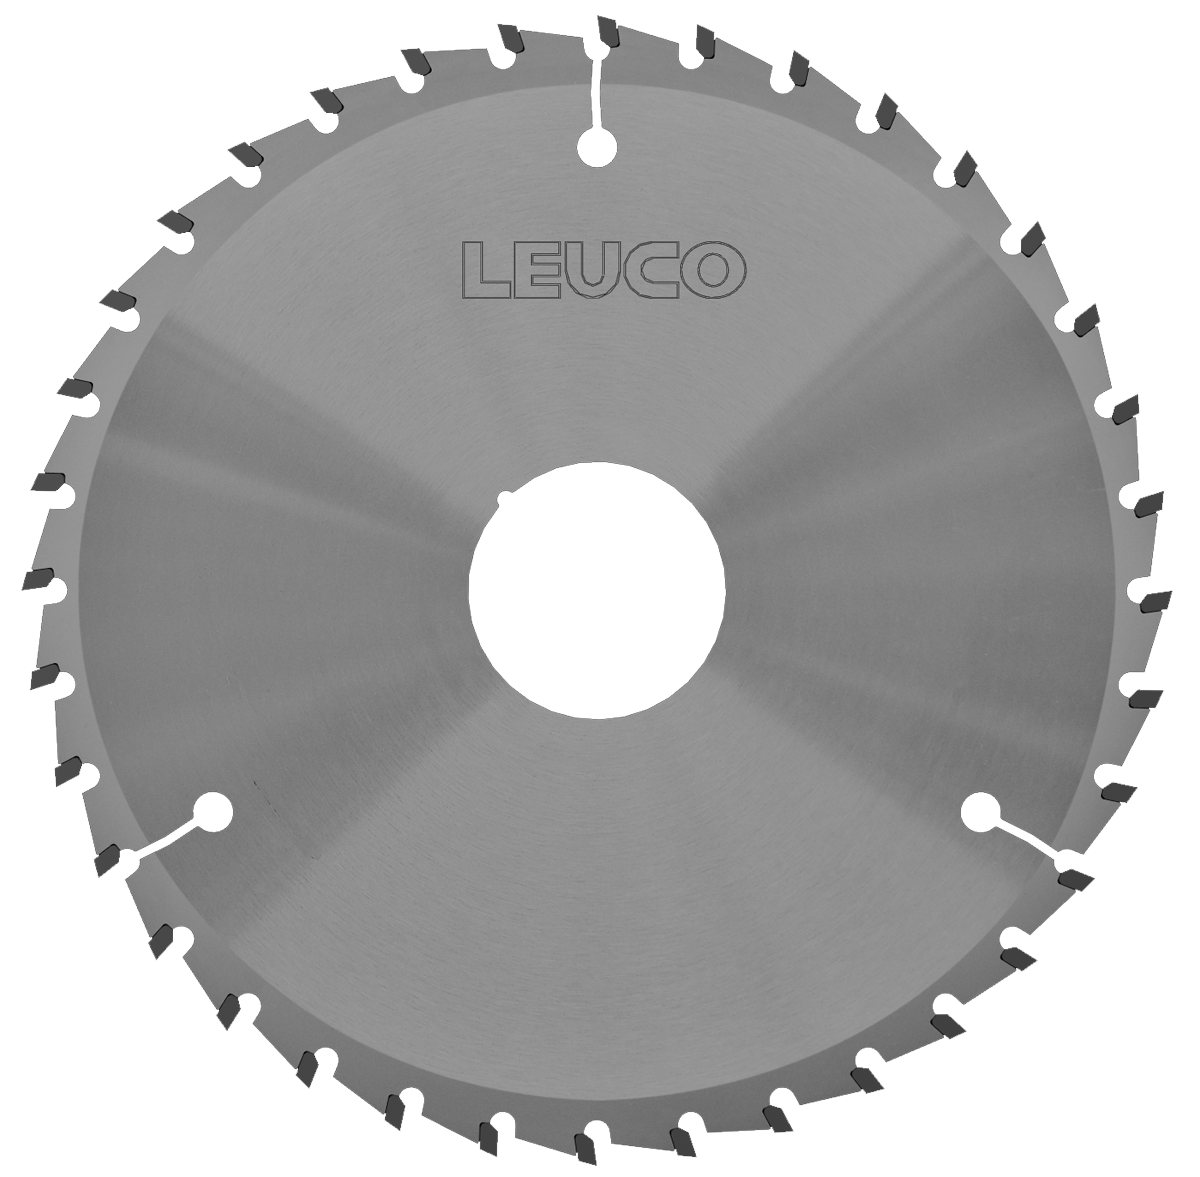 nn-System Scoring Saw Blades for Cutting Plastic Laminated Panels with Horizontal Beam Saws